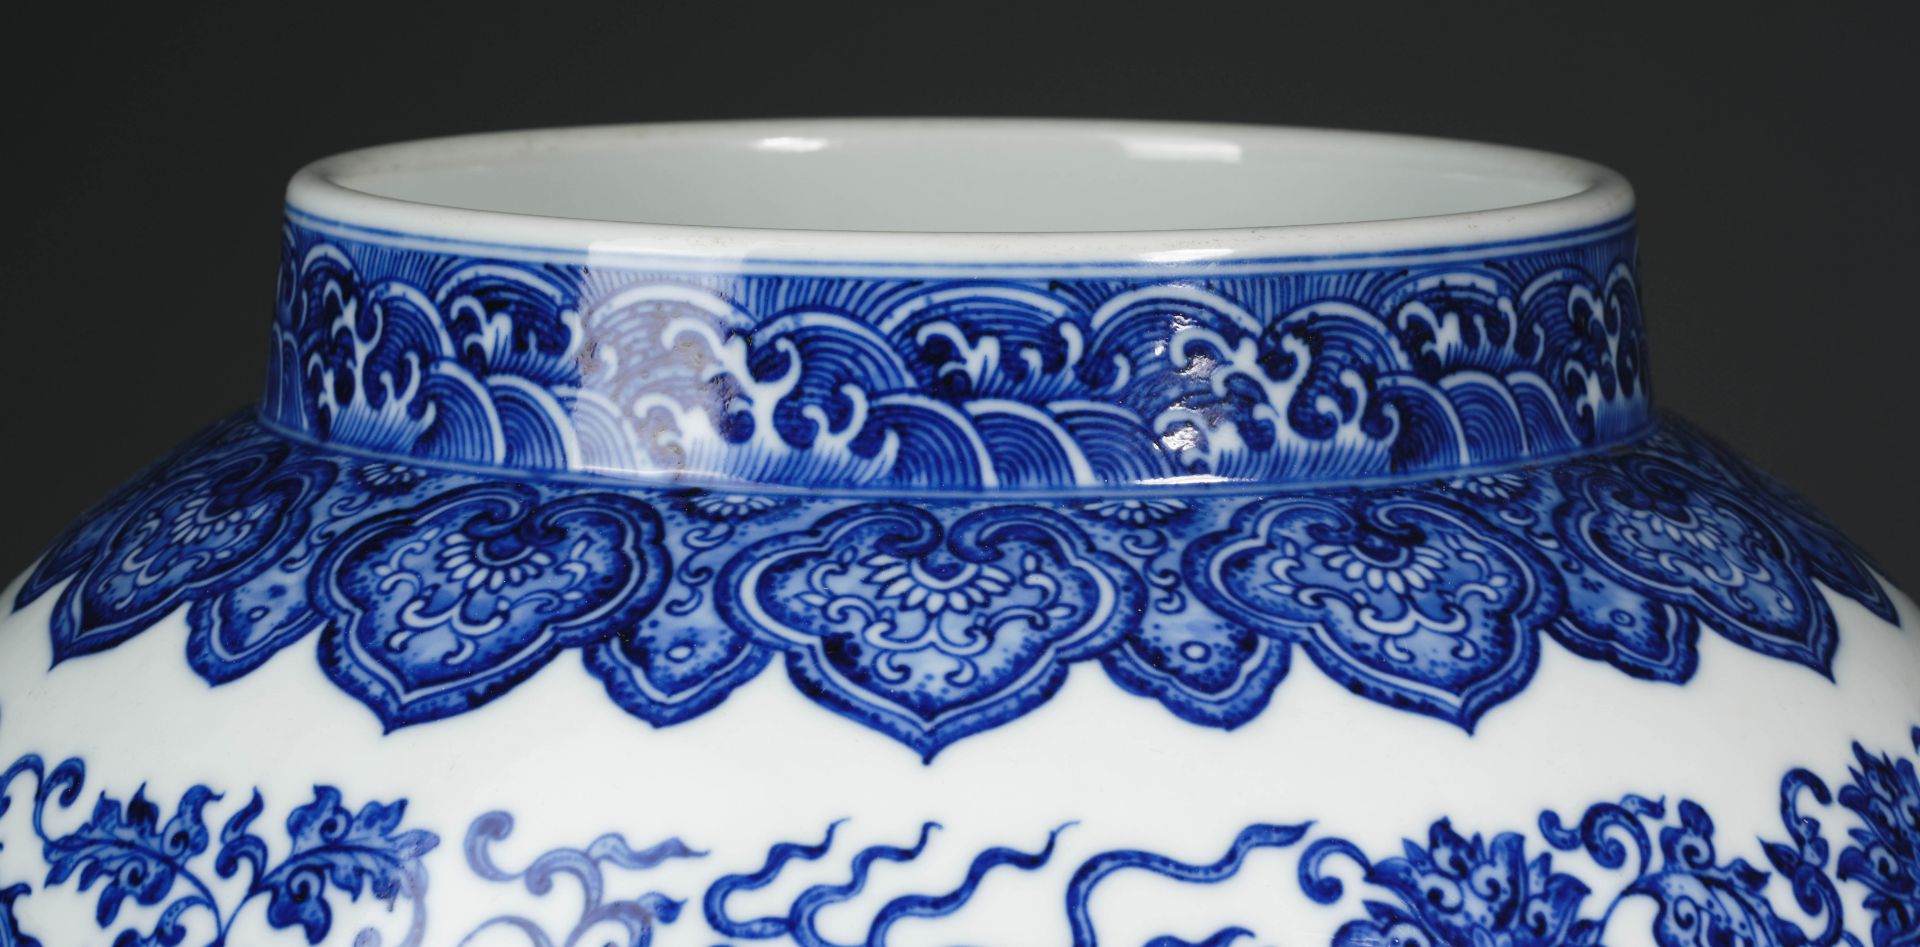 A Chinese Blue and White Dragon Jar with Cover - Image 6 of 11